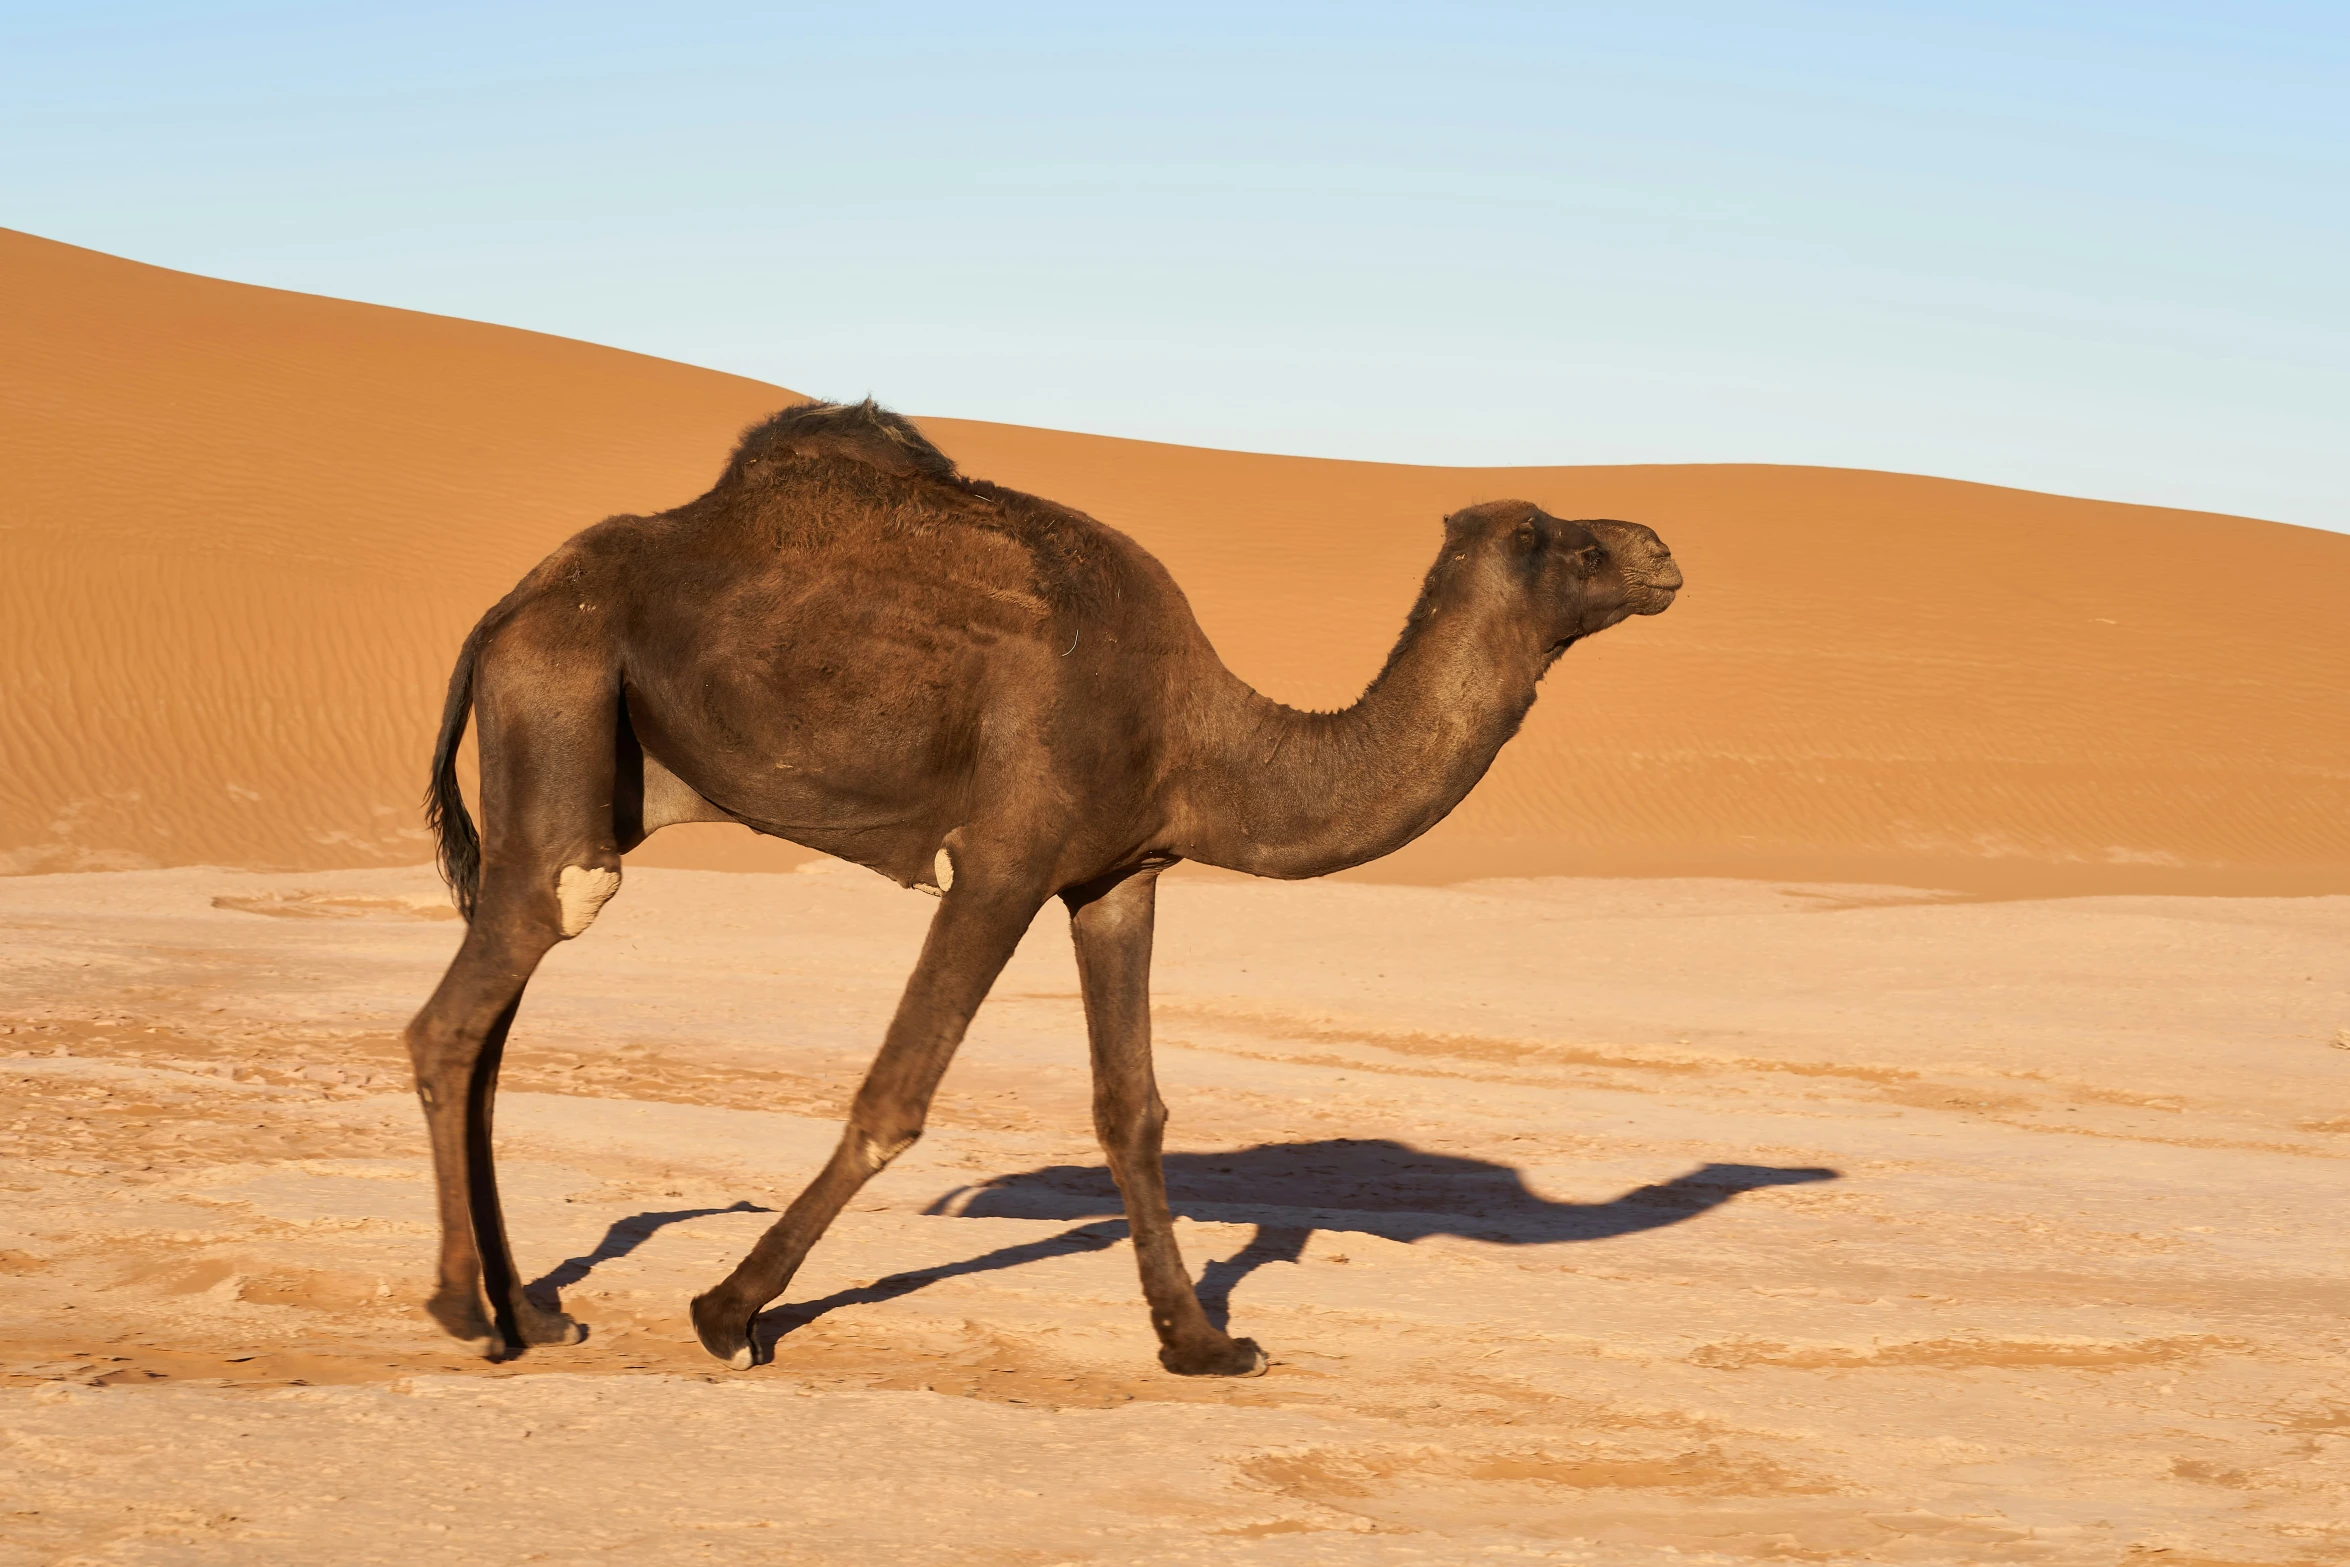 a single camel is standing on the sand near a dune